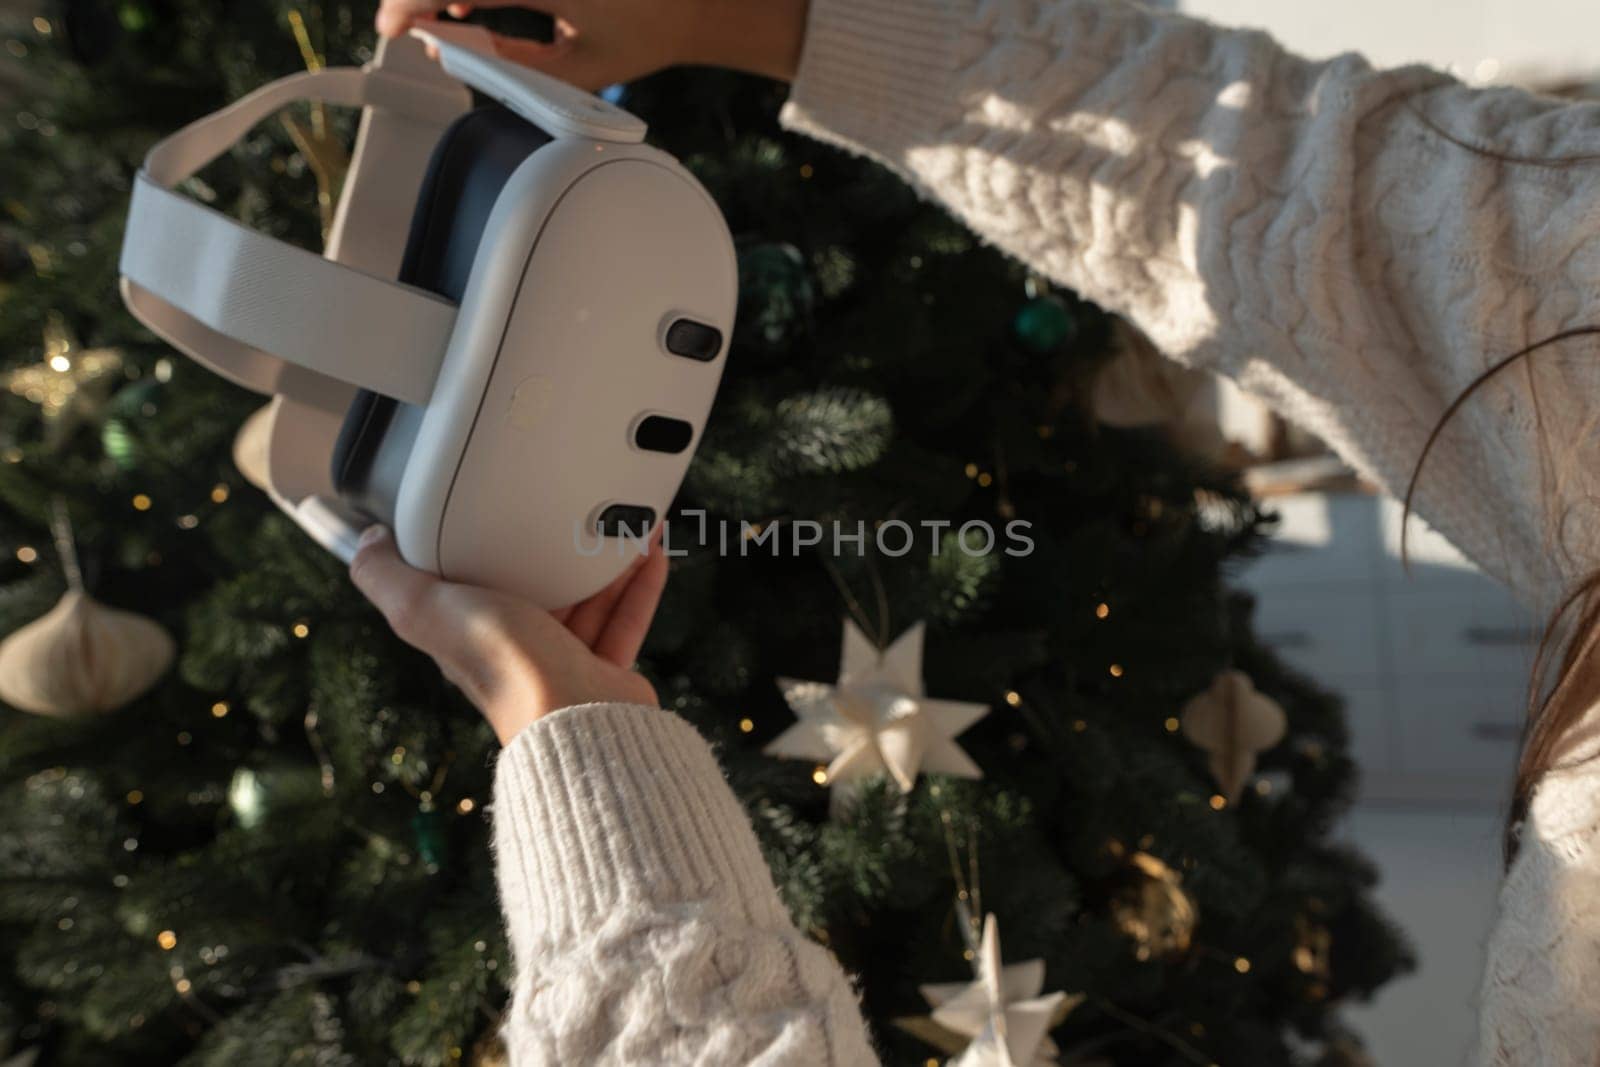 In front of a Christmas tree, a girl is holding a virtual reality headset. High quality photo